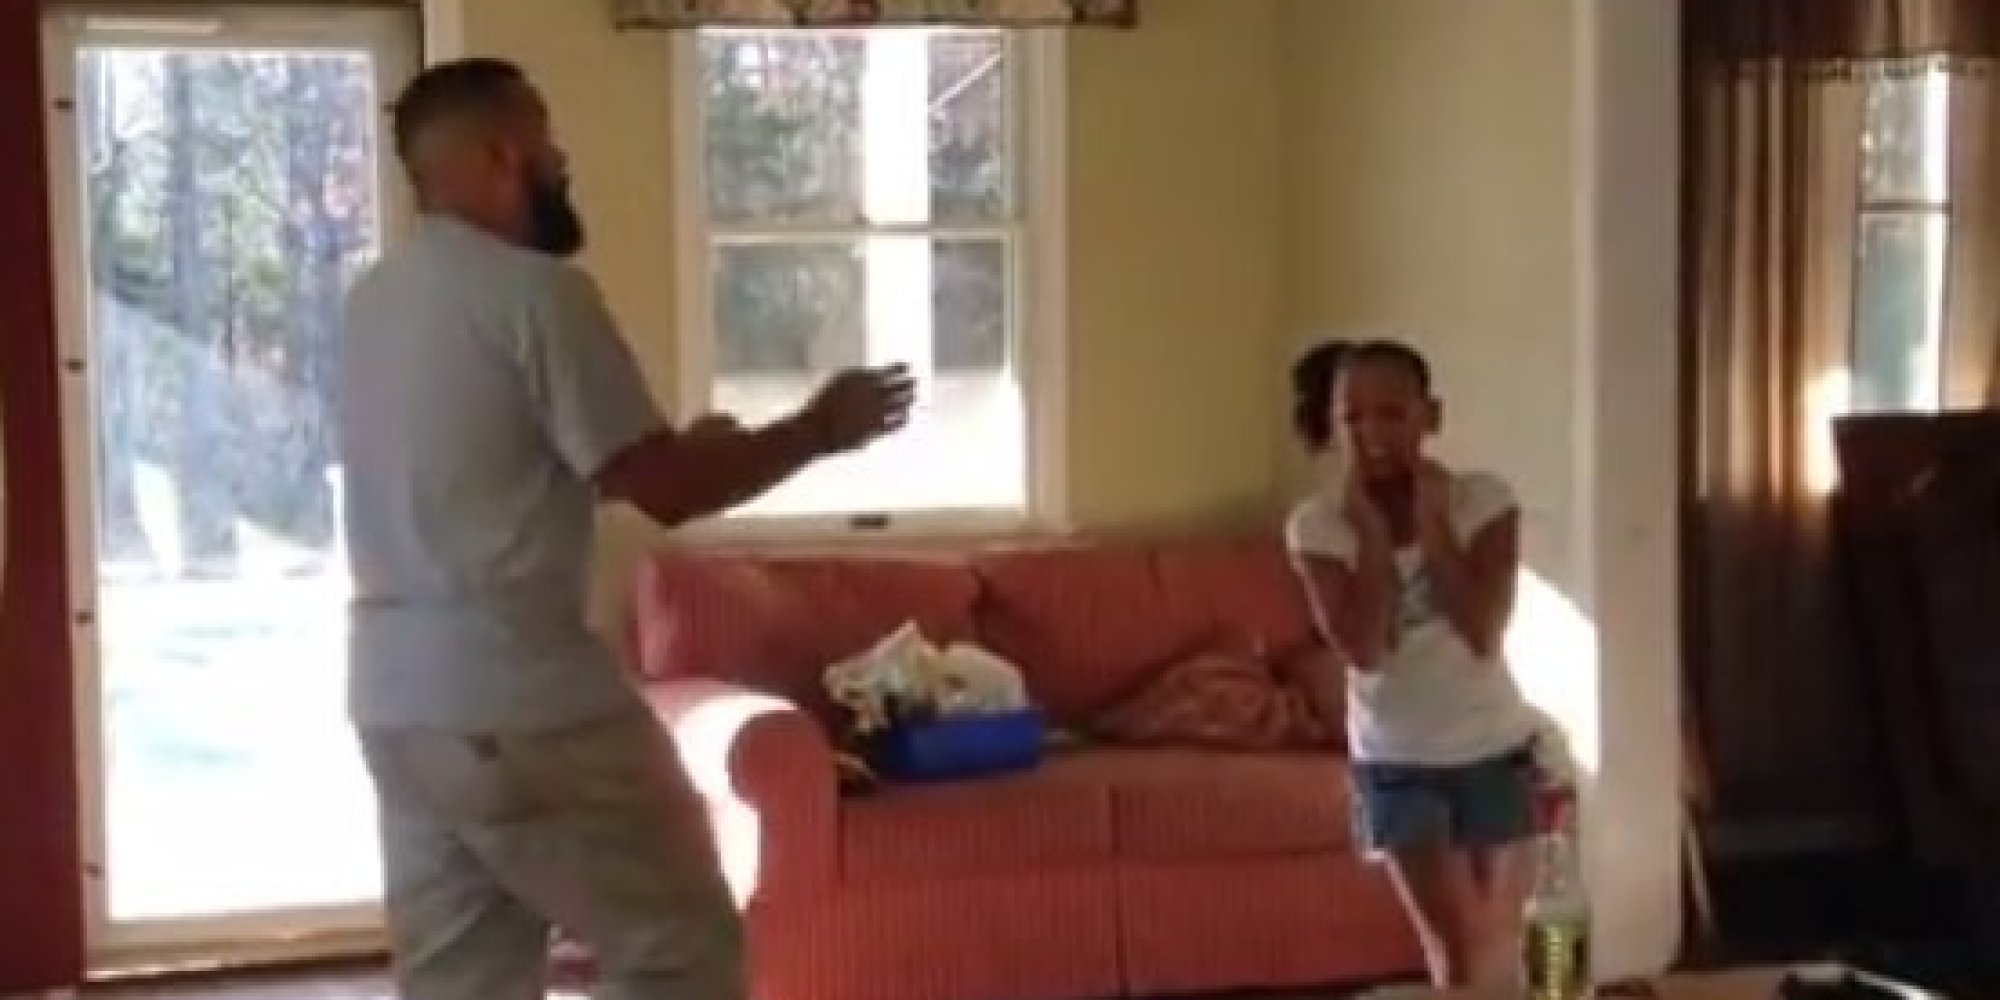 Daddy Daughter Duo Bust Serious Moves In Adorable Old School Dance 